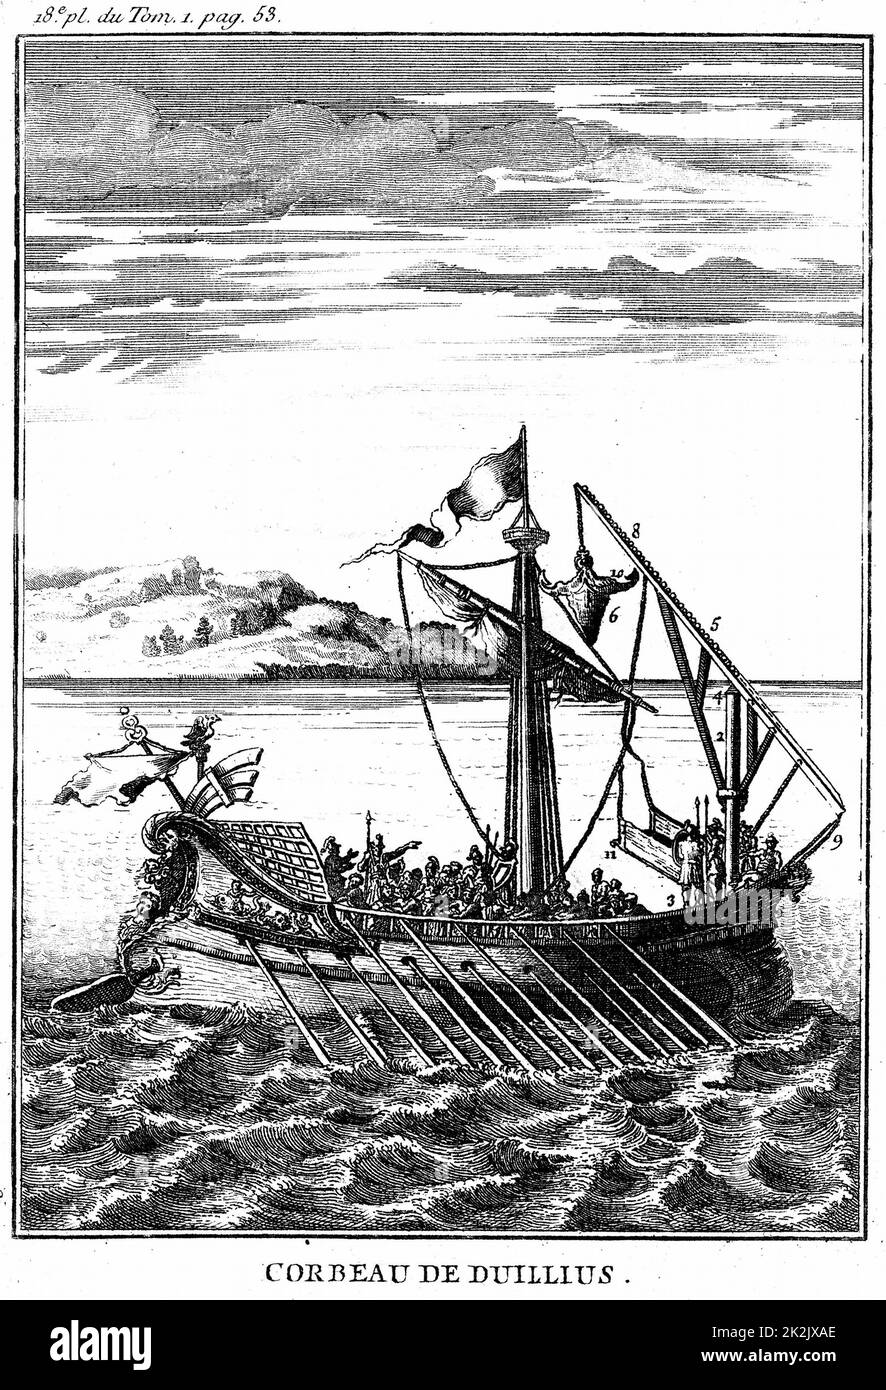 Roman war galley equipped with a corvus (right). 18th century copperplate engraving Stock Photo